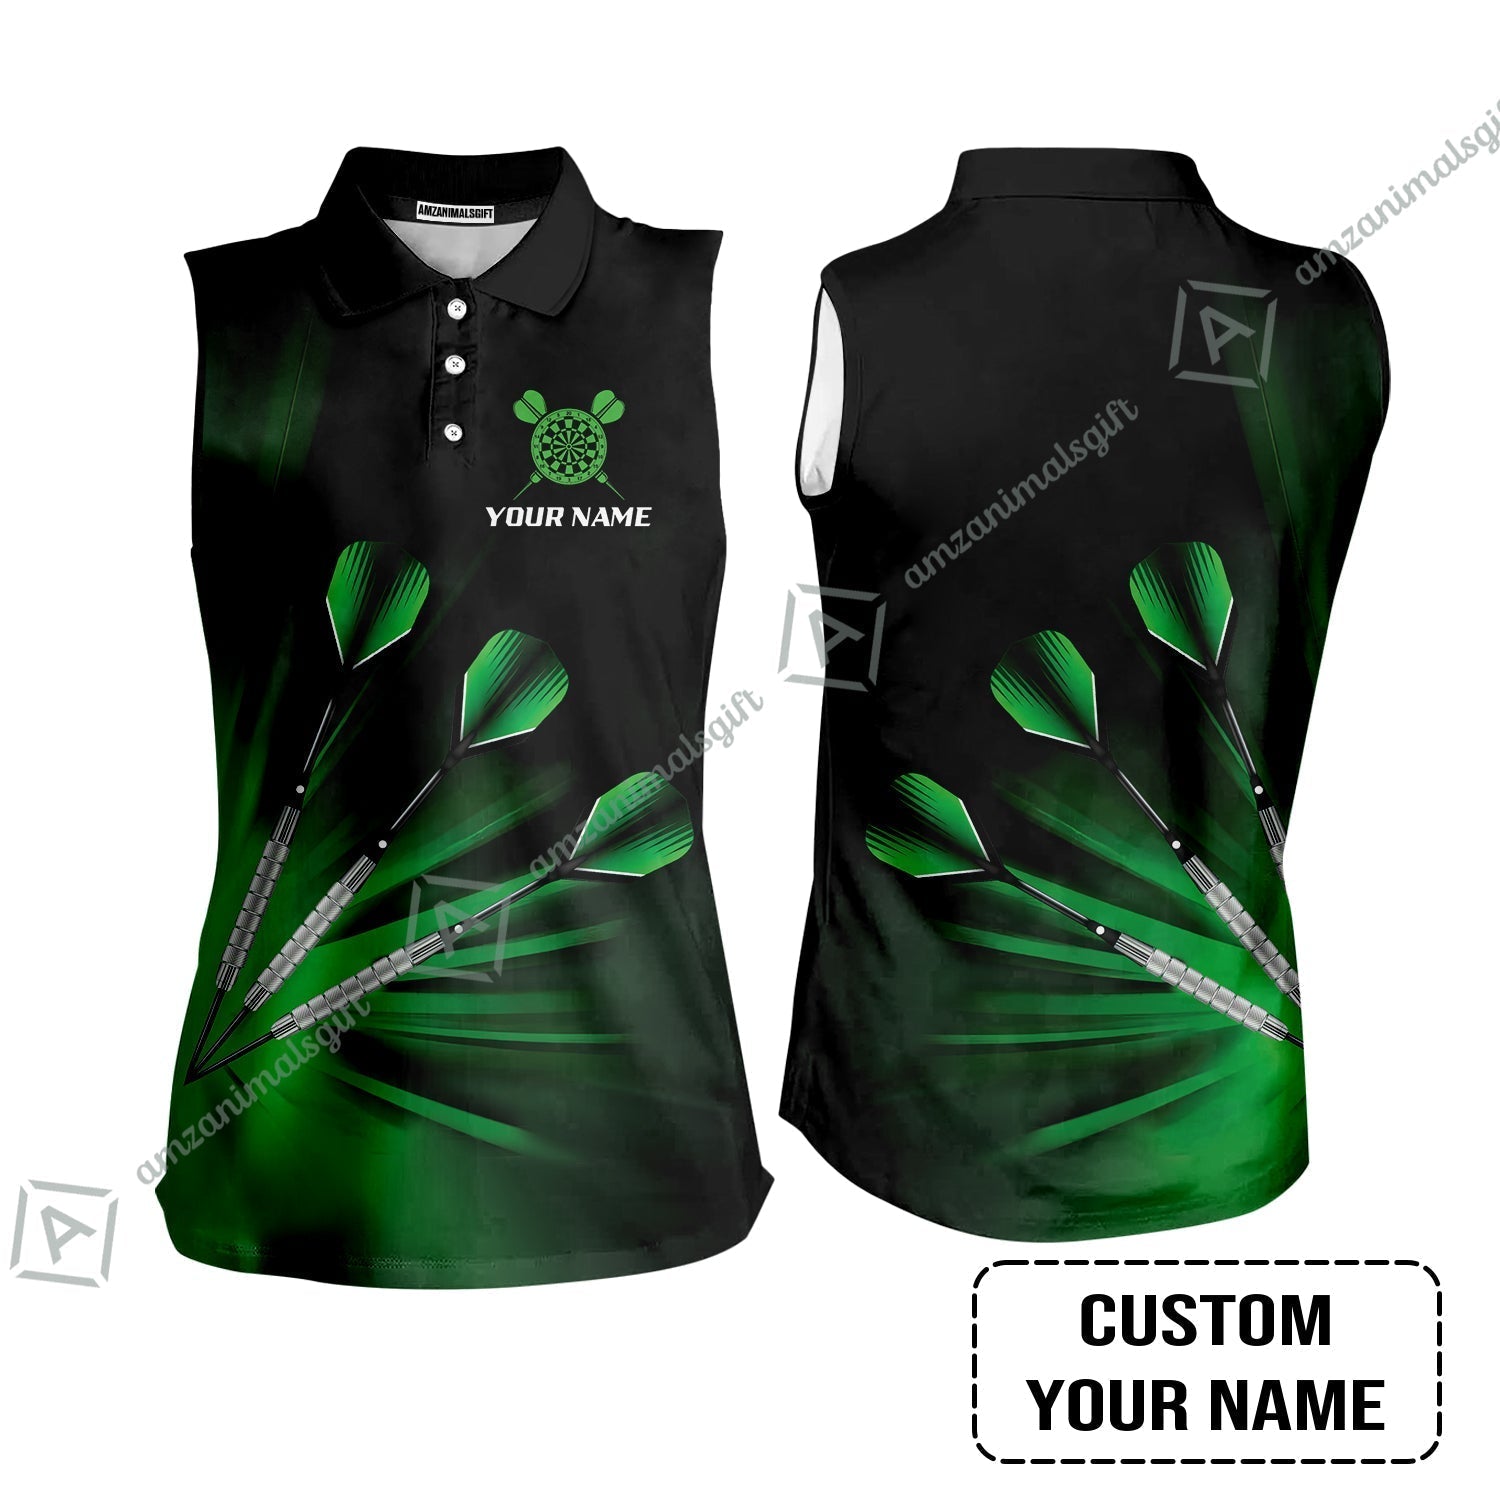 Customized Darts Women Sleeveless Polo Shirt, Personalized Name Polo Shirt - Perfect Gift For Darts Lovers, Darts Players